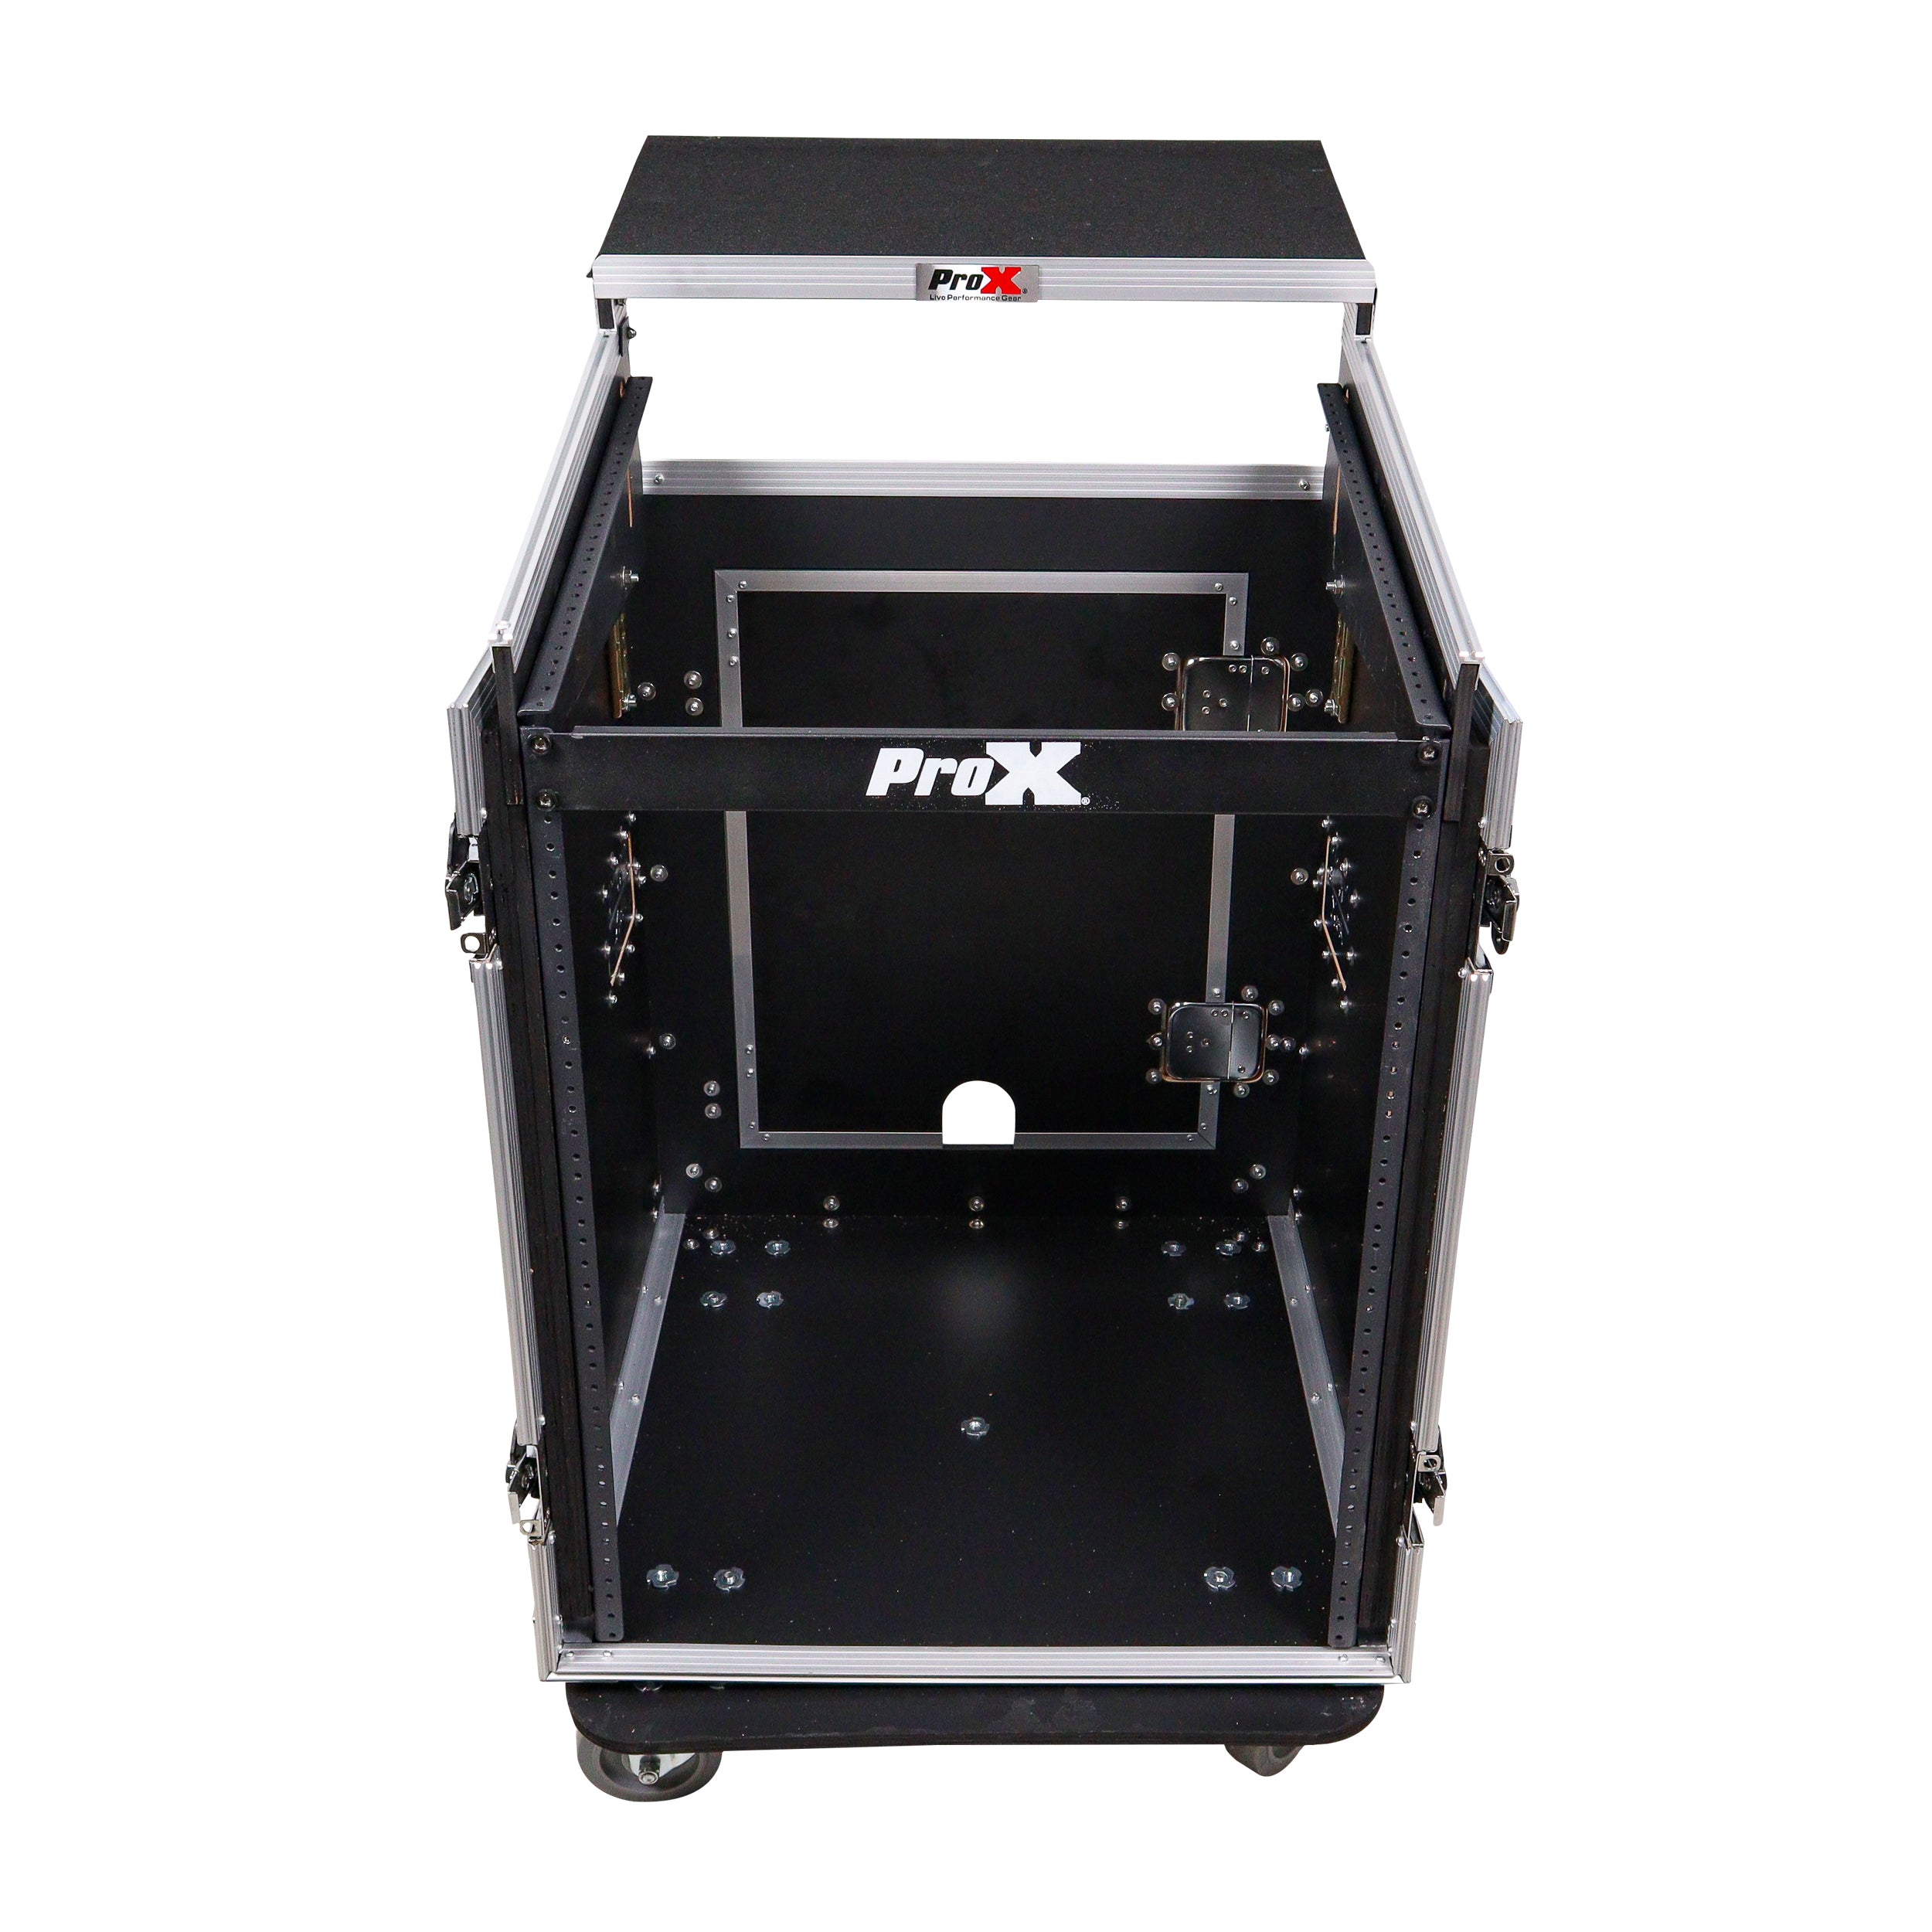 Pro X 14U Vertical Rack Mount Flight Case with 10U Top for Mixer Combo Amp Rack with Laptop Shelf and Caster Wheels T-14MRLT